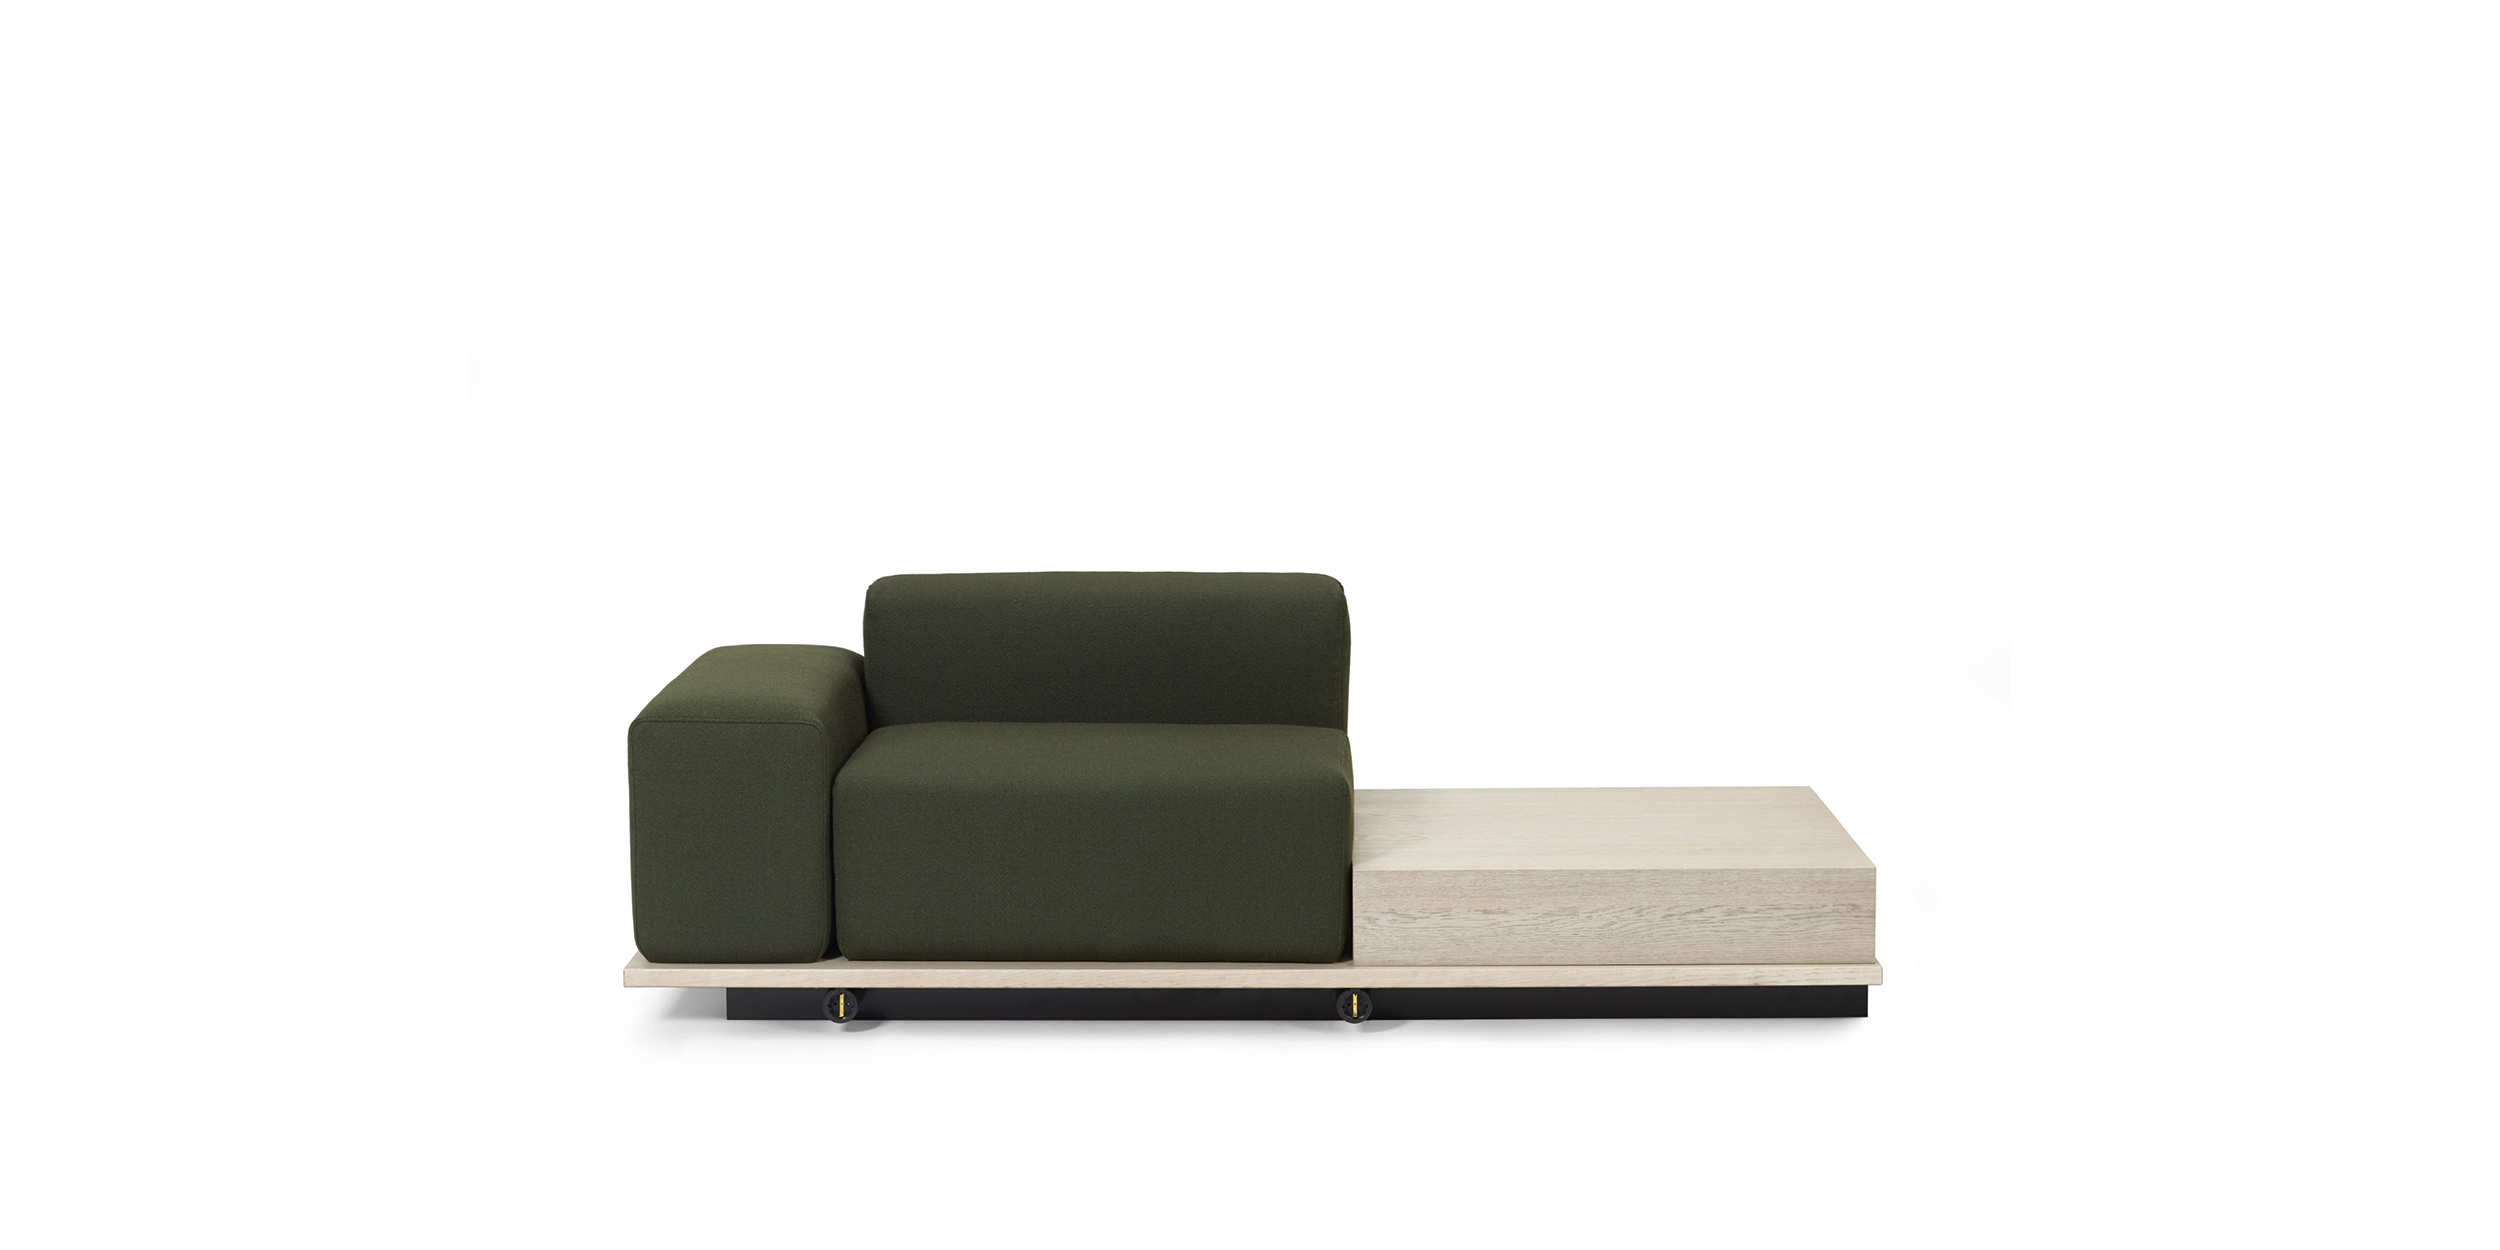 Meet, Armrest/1-seater/table by Fattorini+Rizzini+Partners